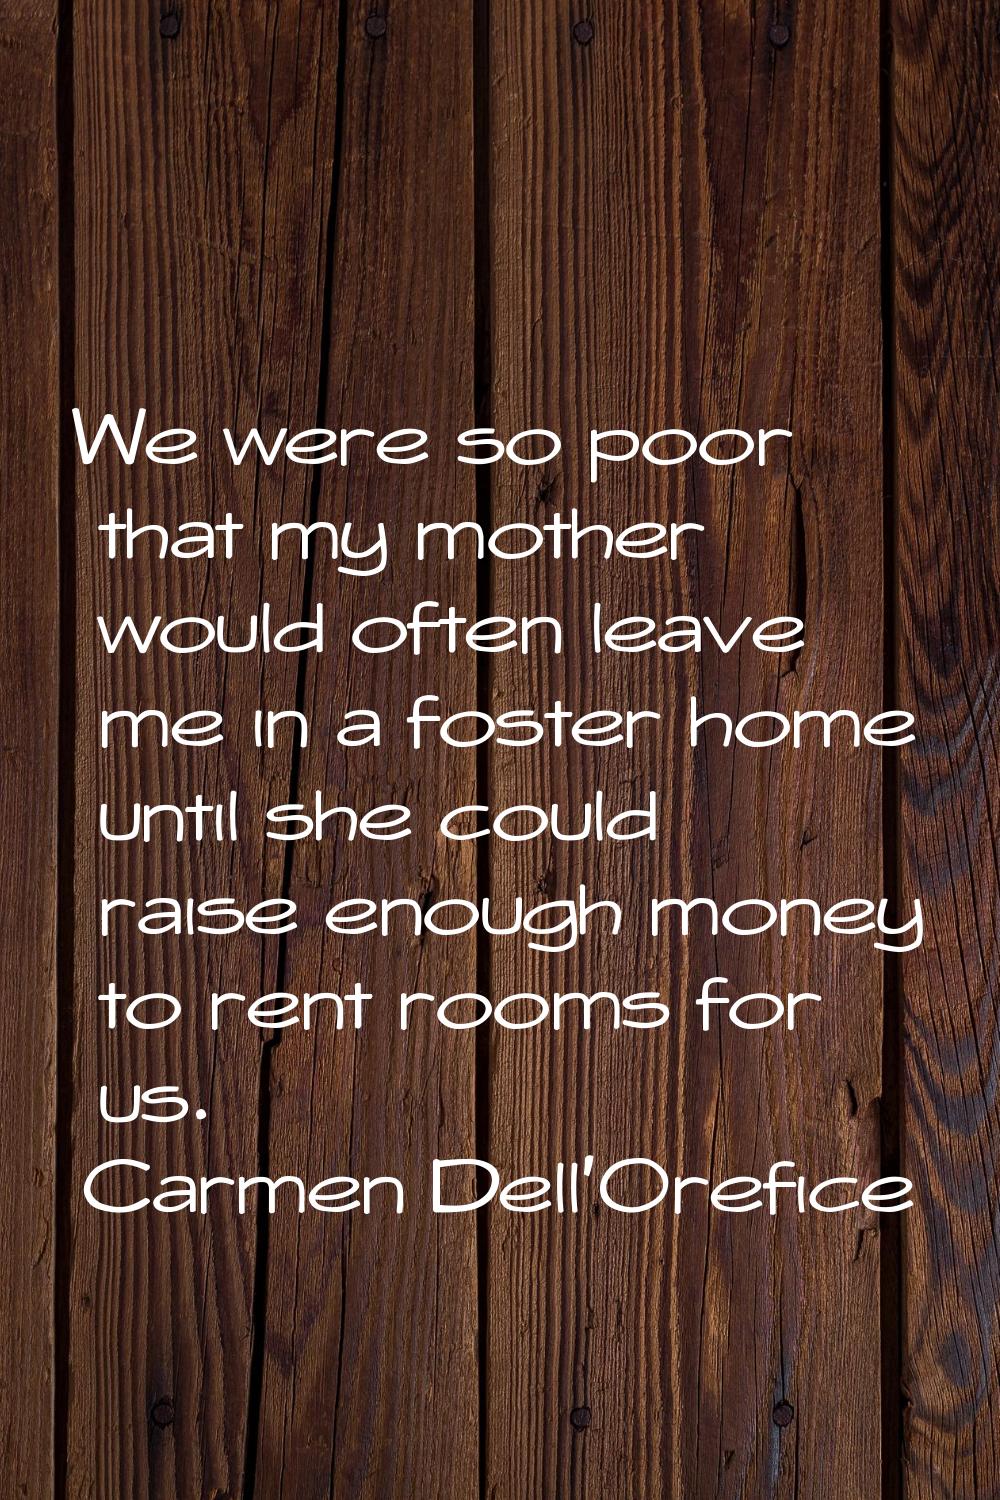 We were so poor that my mother would often leave me in a foster home until she could raise enough m